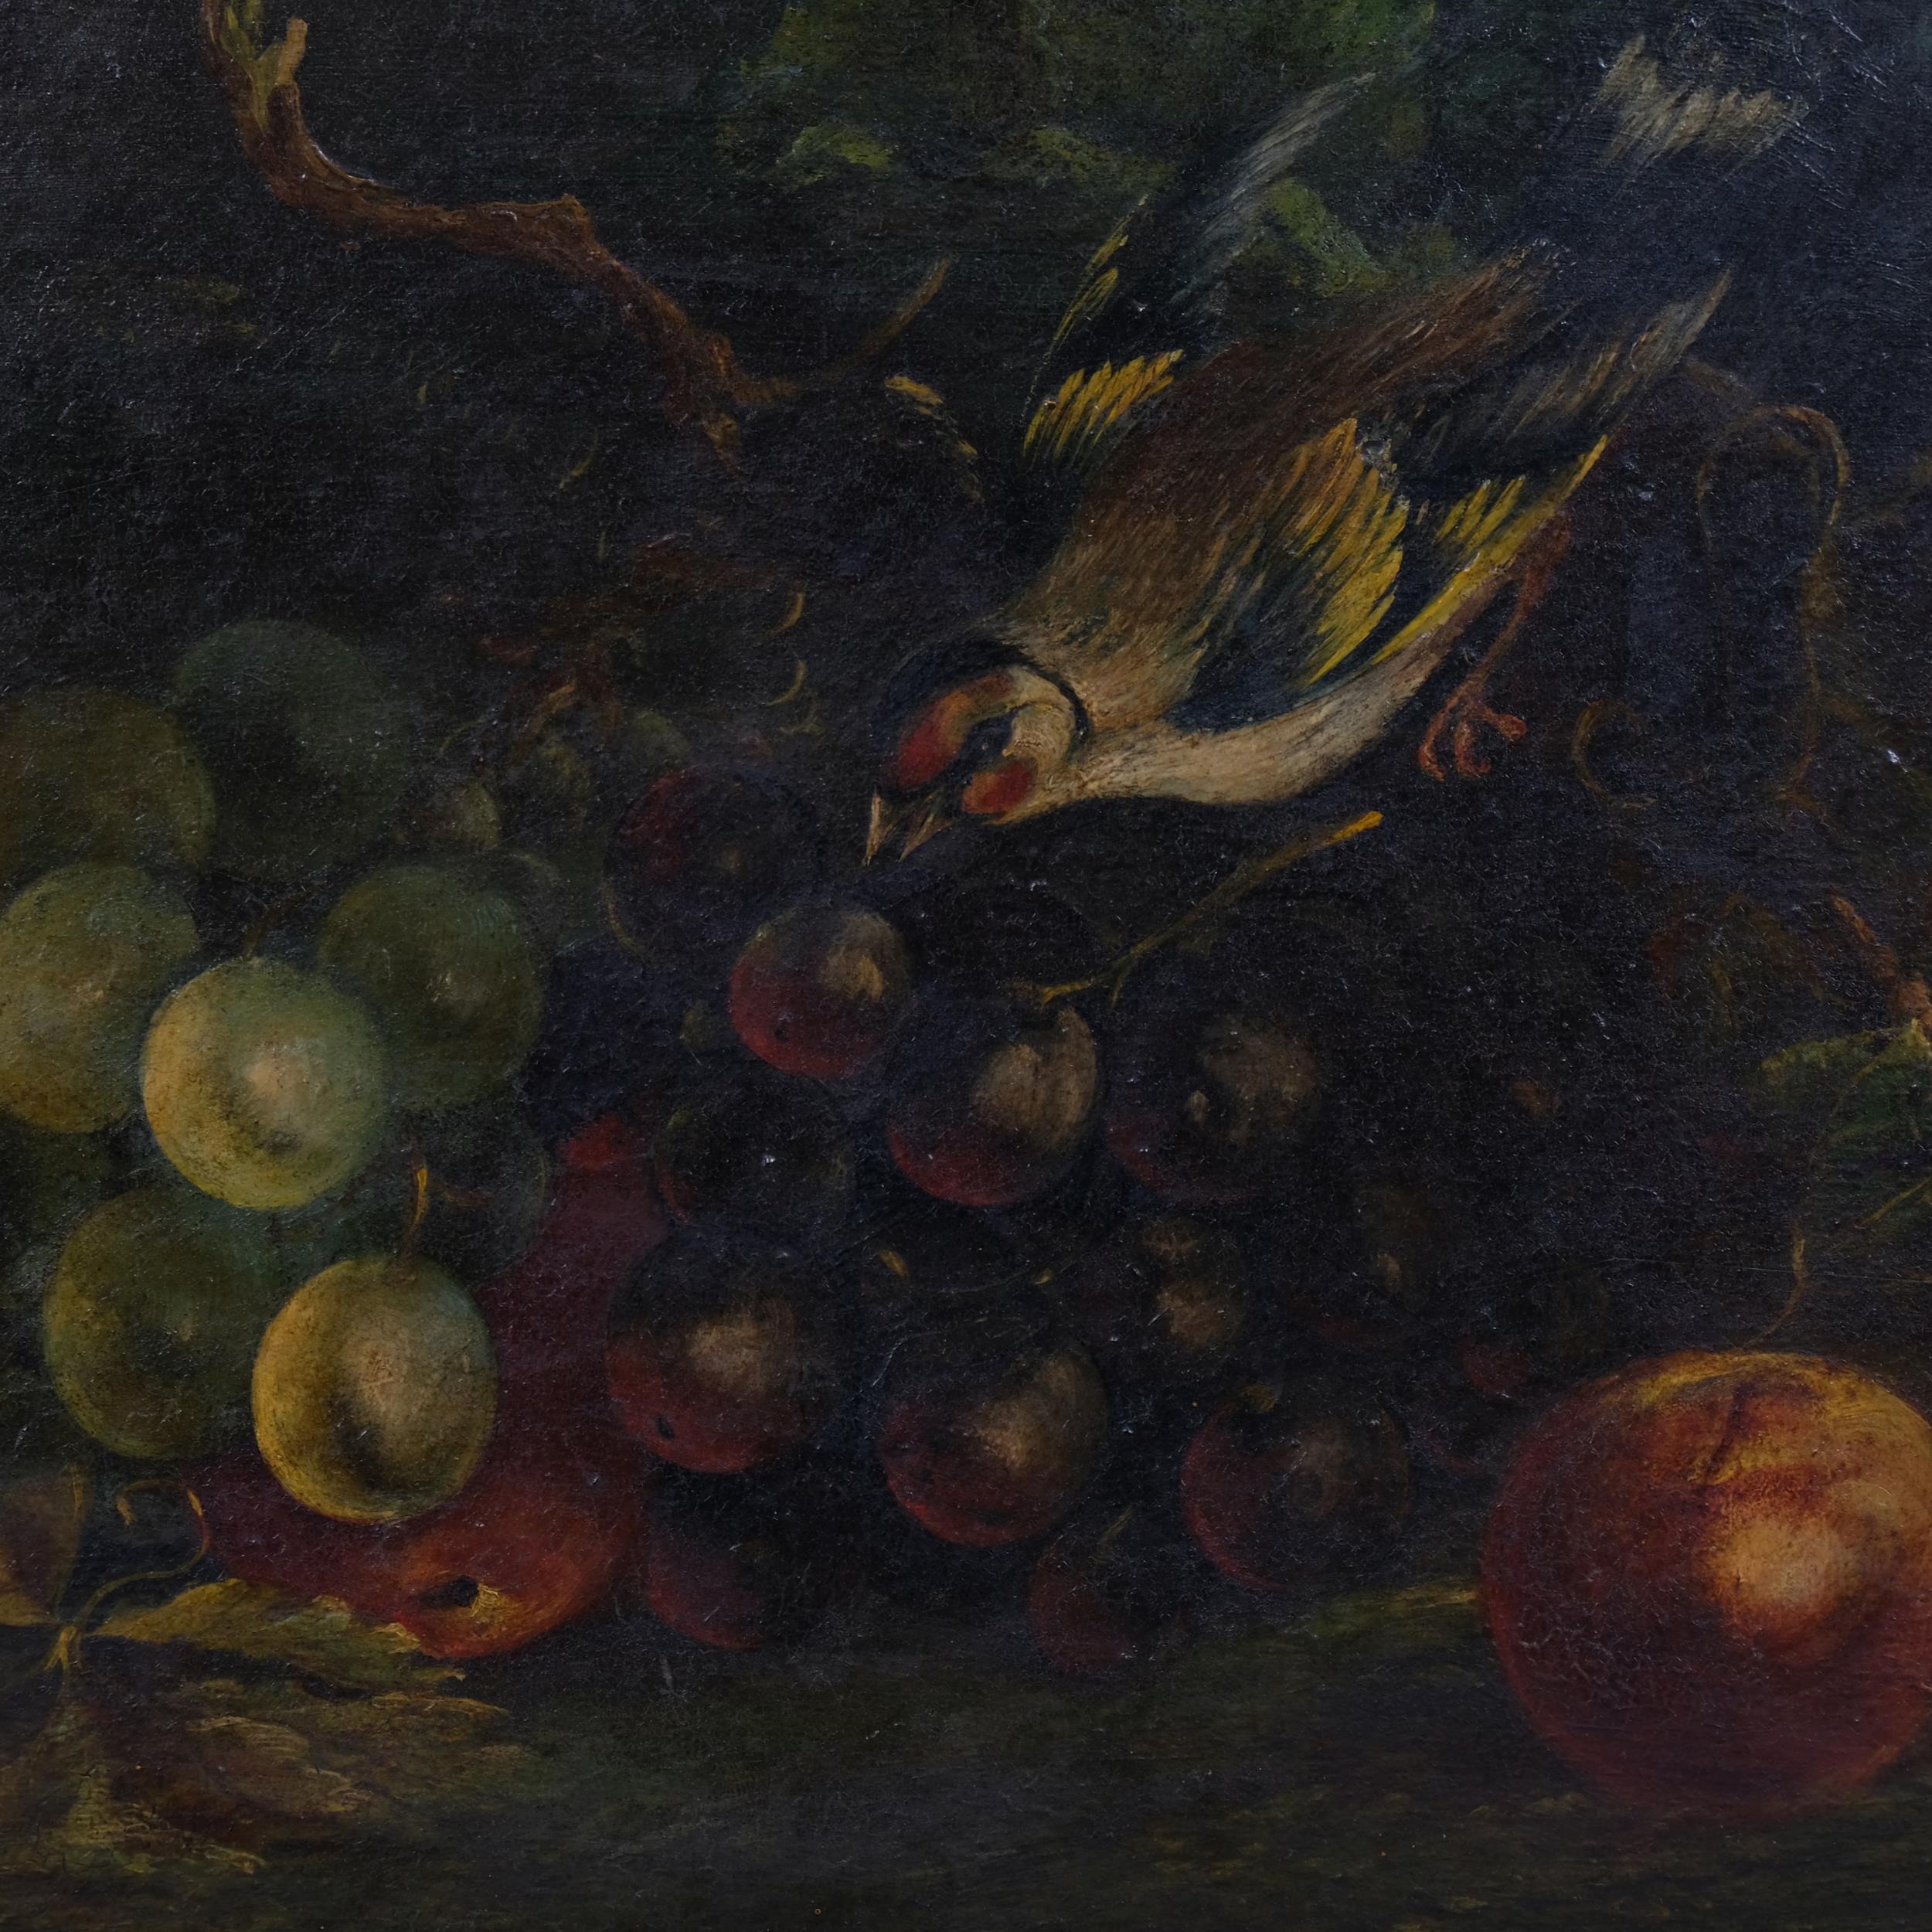 Bird with grapes on a mossy bank, 19th century oil on wood panel, unsigned, 30cm x 34cm, framed Good - Image 2 of 4